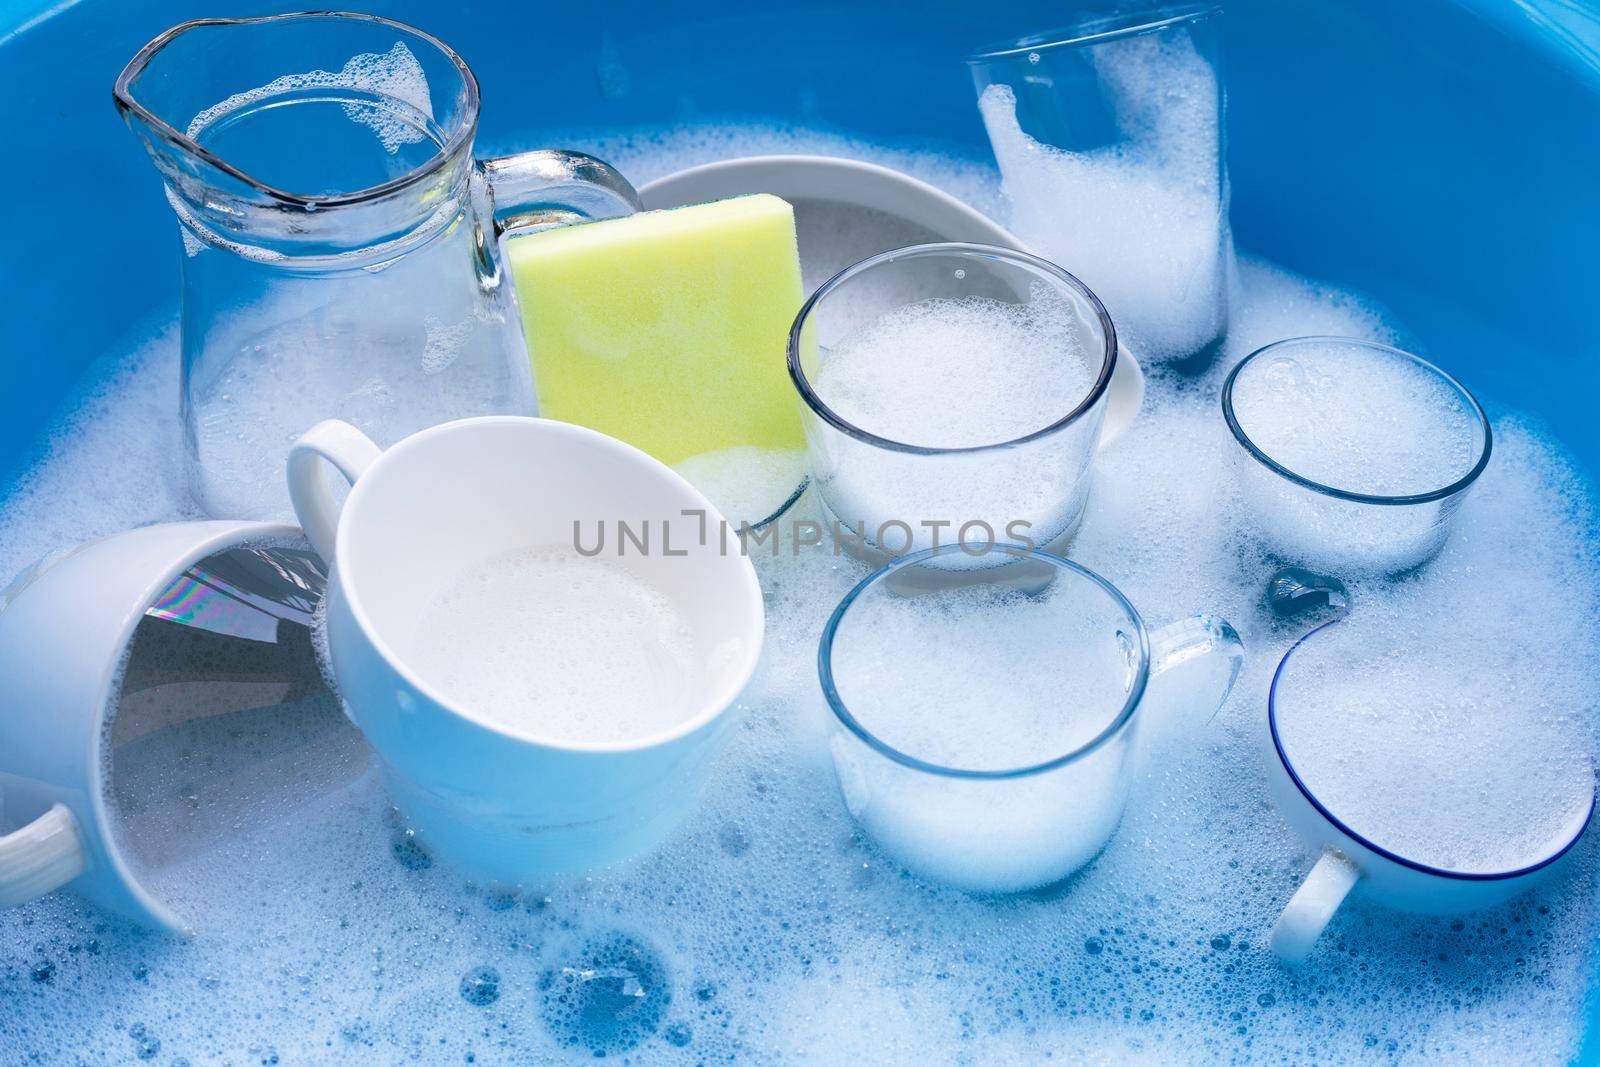 Washing used drinking glasses and cups with yellow sponge